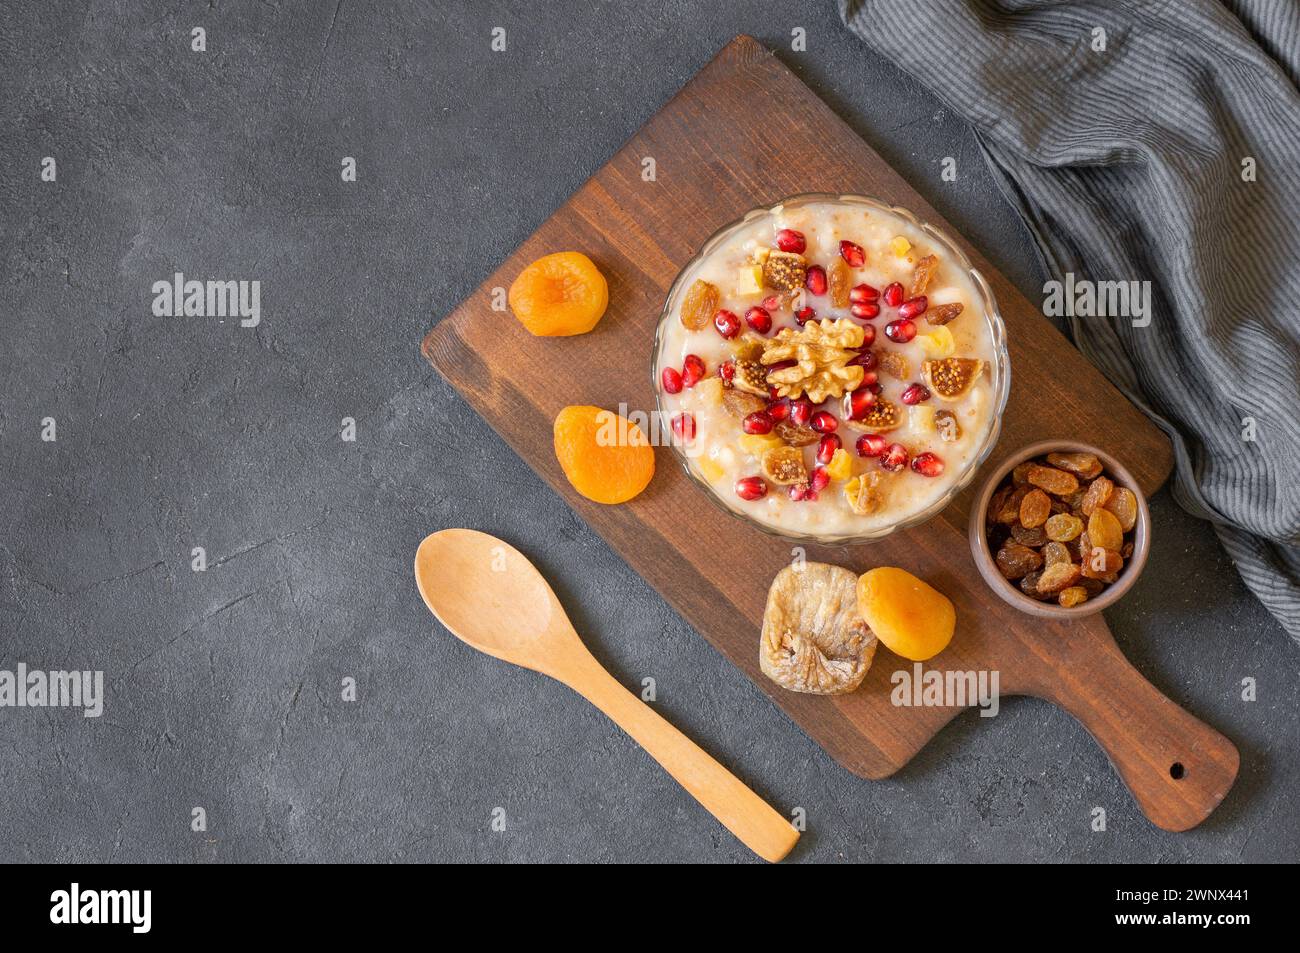 Traditional Turkish delicious mixed dessert, ashura (asure) with pomegranate seeds, walnut, apricot, Noah’s pudding Stock Photo